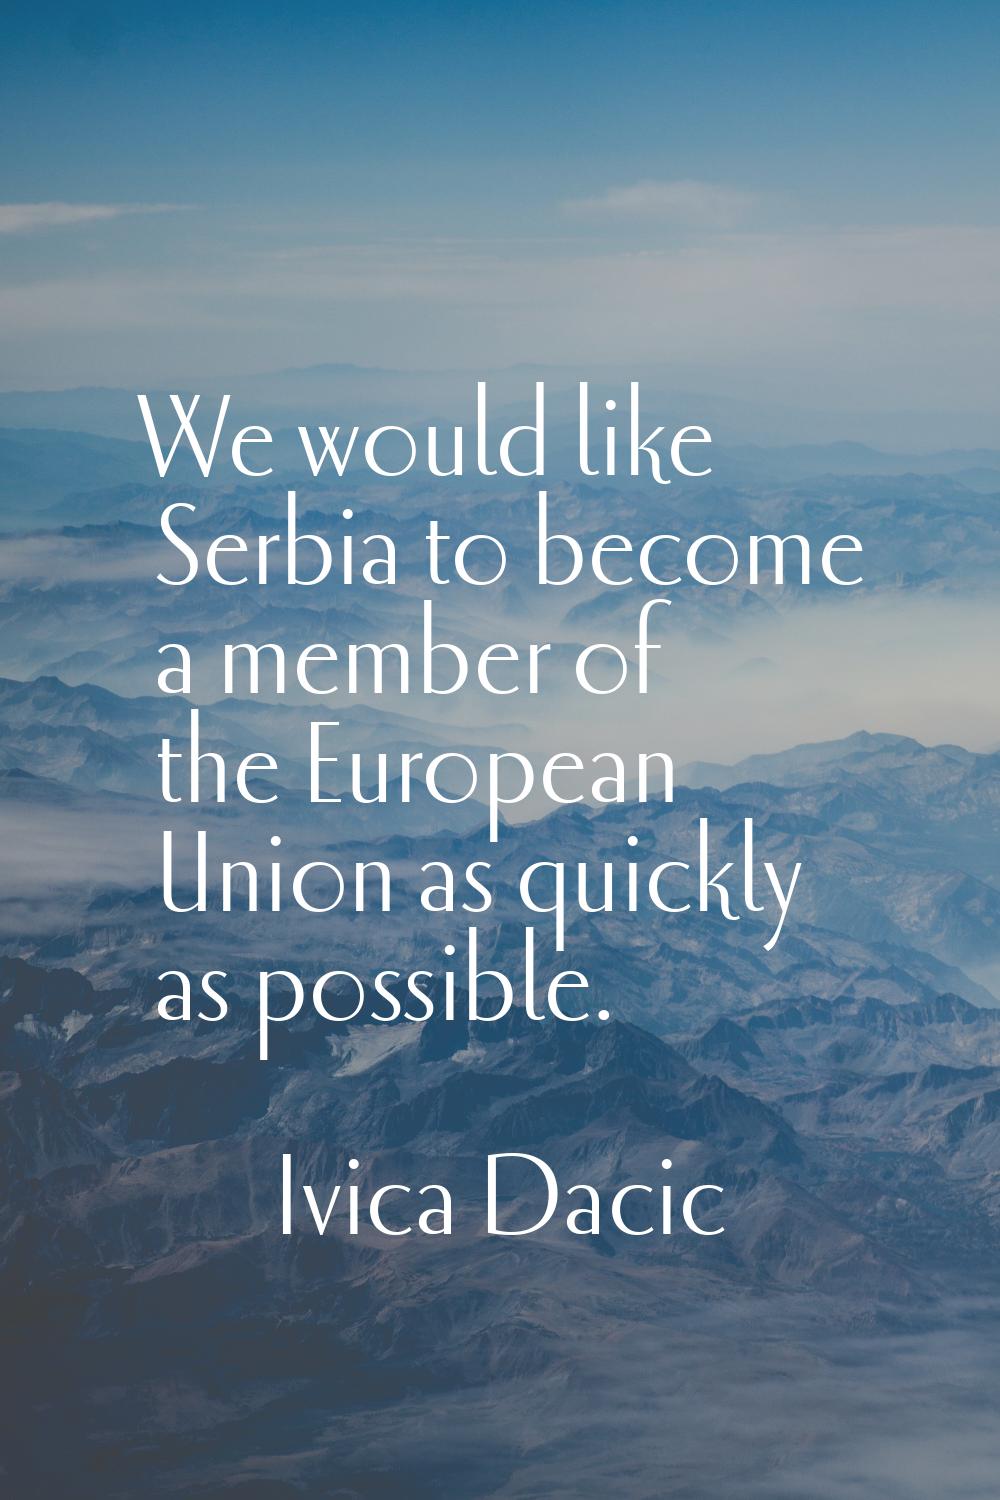 We would like Serbia to become a member of the European Union as quickly as possible.